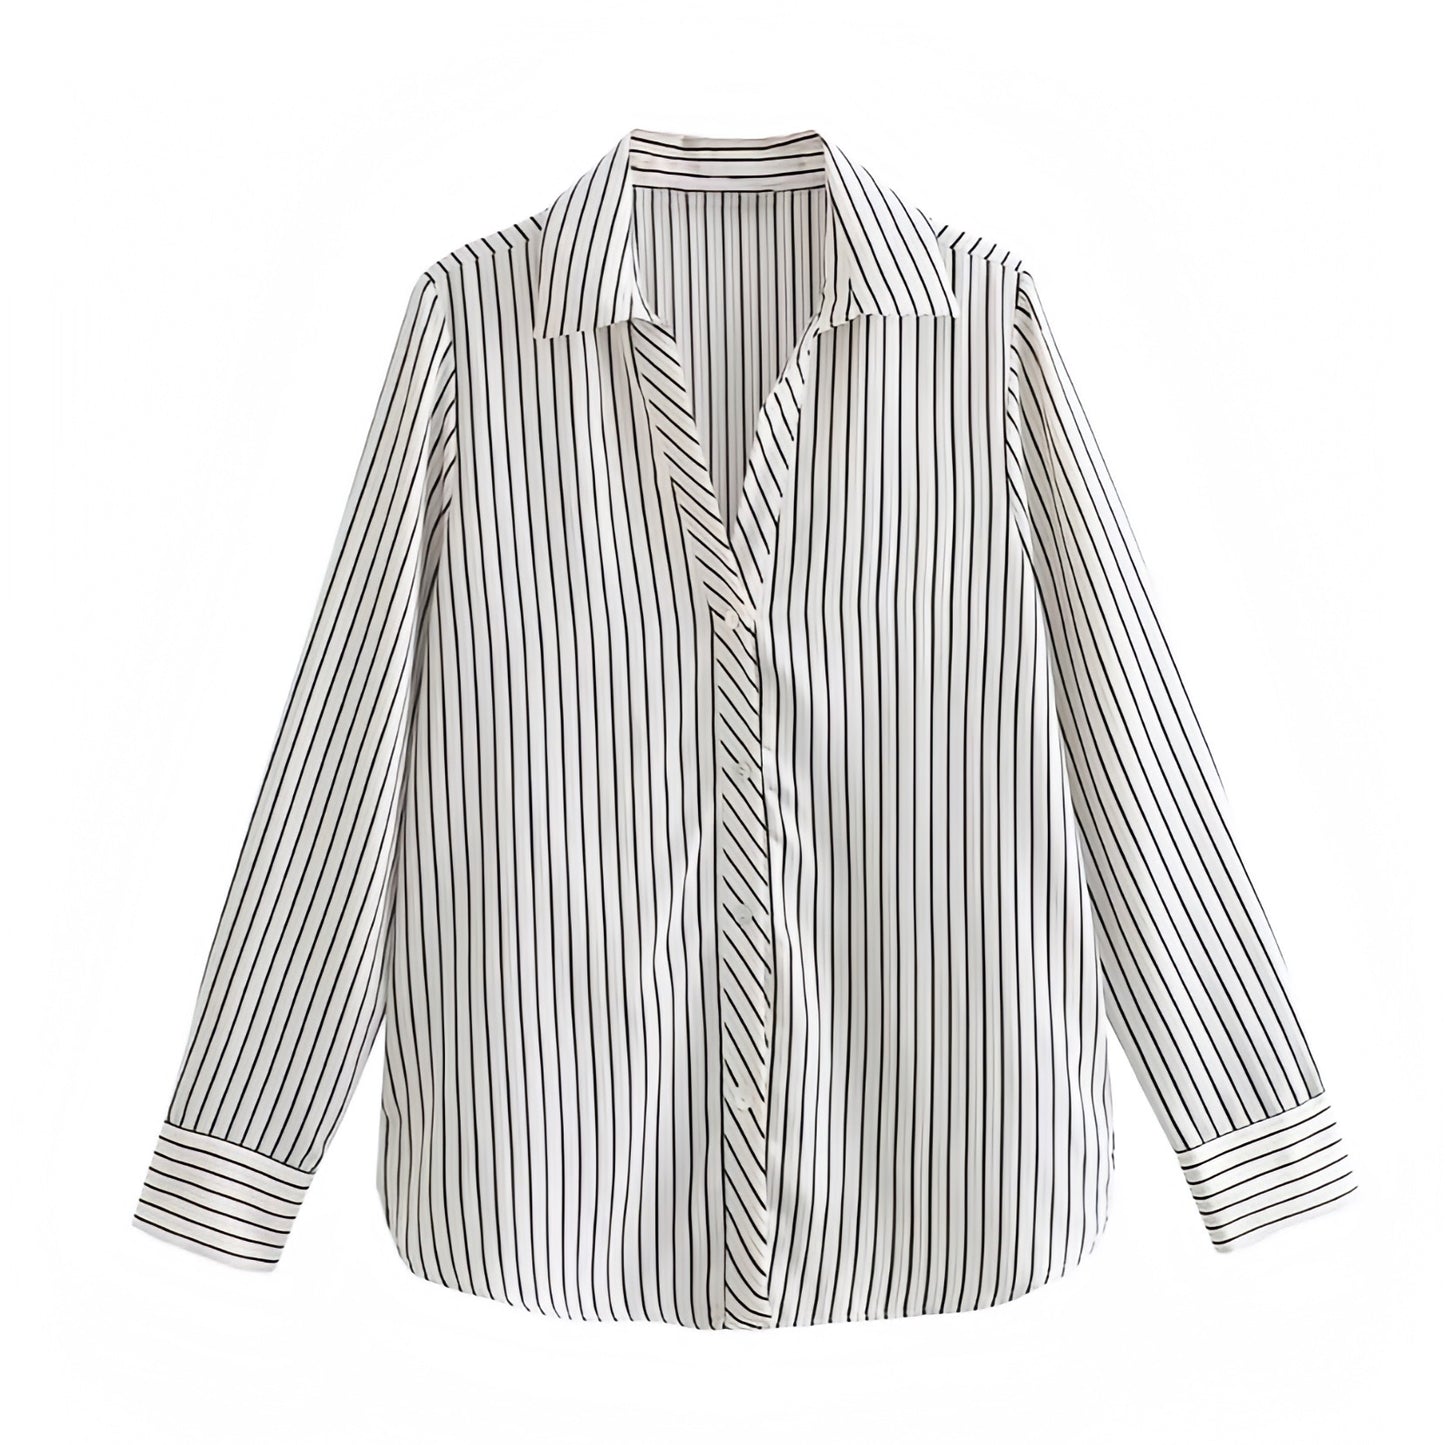 white-and-black-striped-pinstripe-v-neck-button-down-cuffed-long-sleeve-linen-cotton-light-weight-shirt-blouse-women-ladies-chic-trendy-spring-2024-summer-elegant-classy-semi-formal-business-casual-preppy-nautical-beach-wear-vacation-top-stockholm-style-european-zara-revolve-aritzia